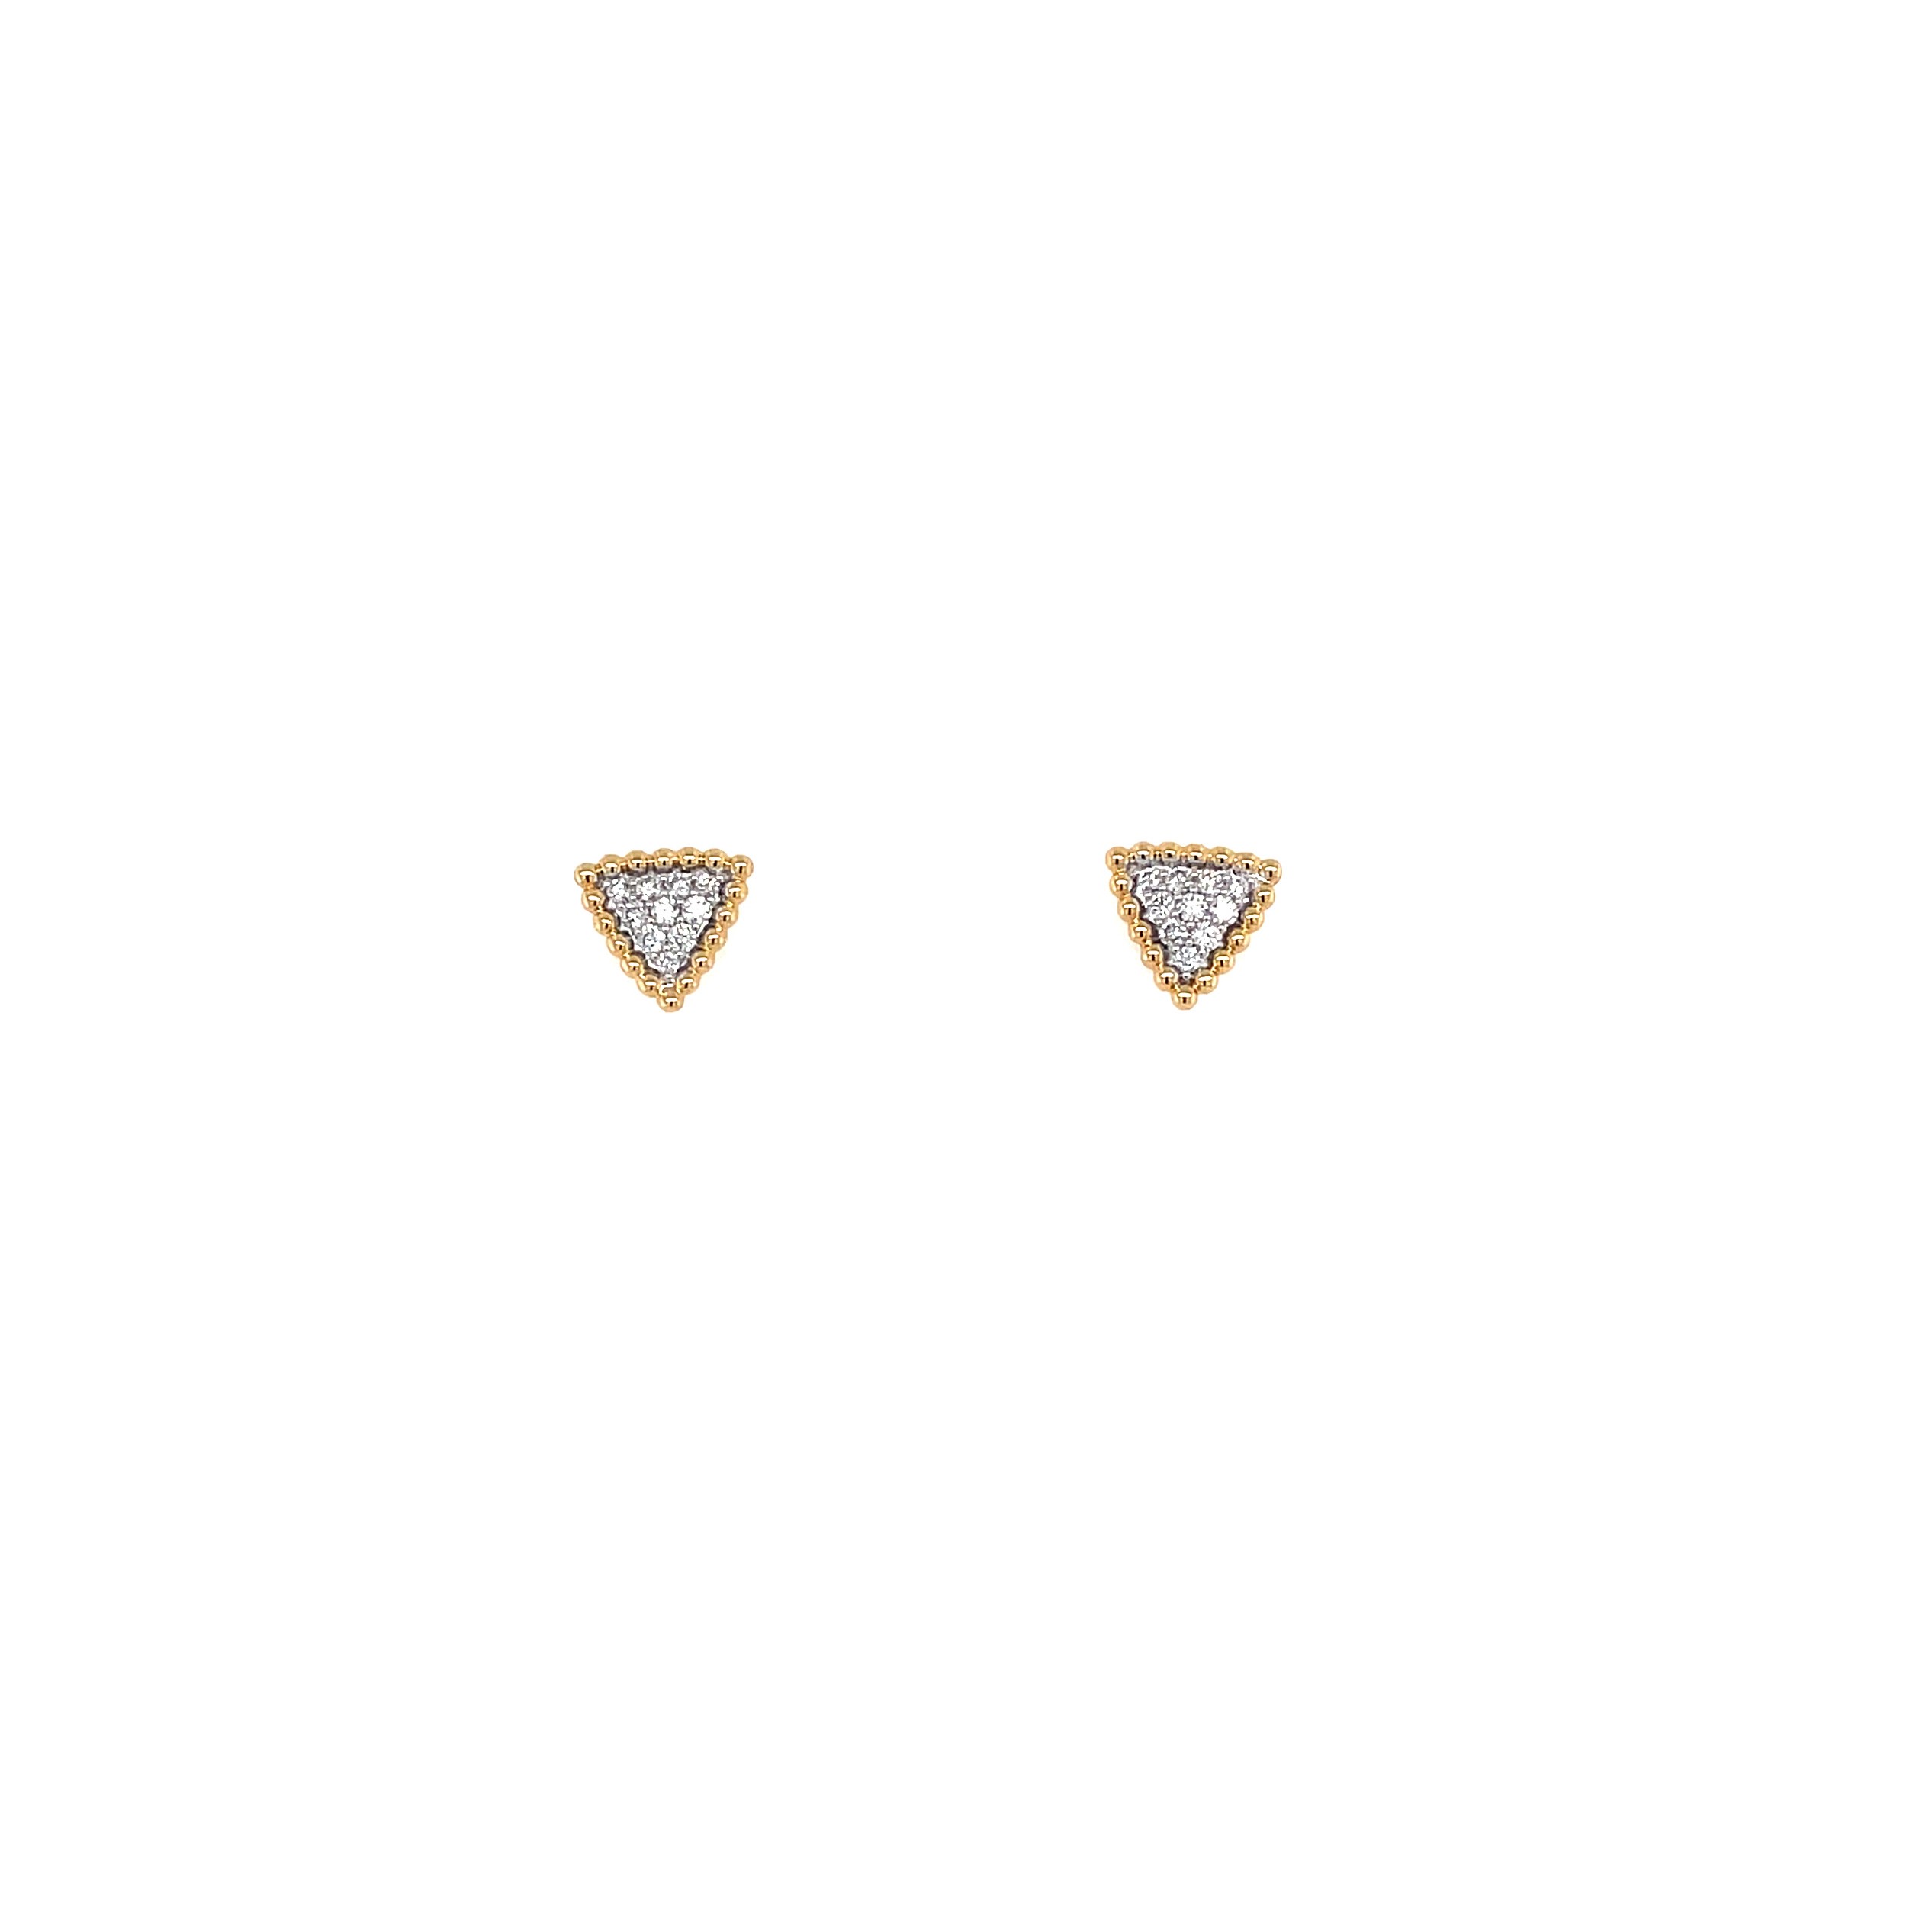 Gold Triangle Cluster Stud Earrings with Diamonds